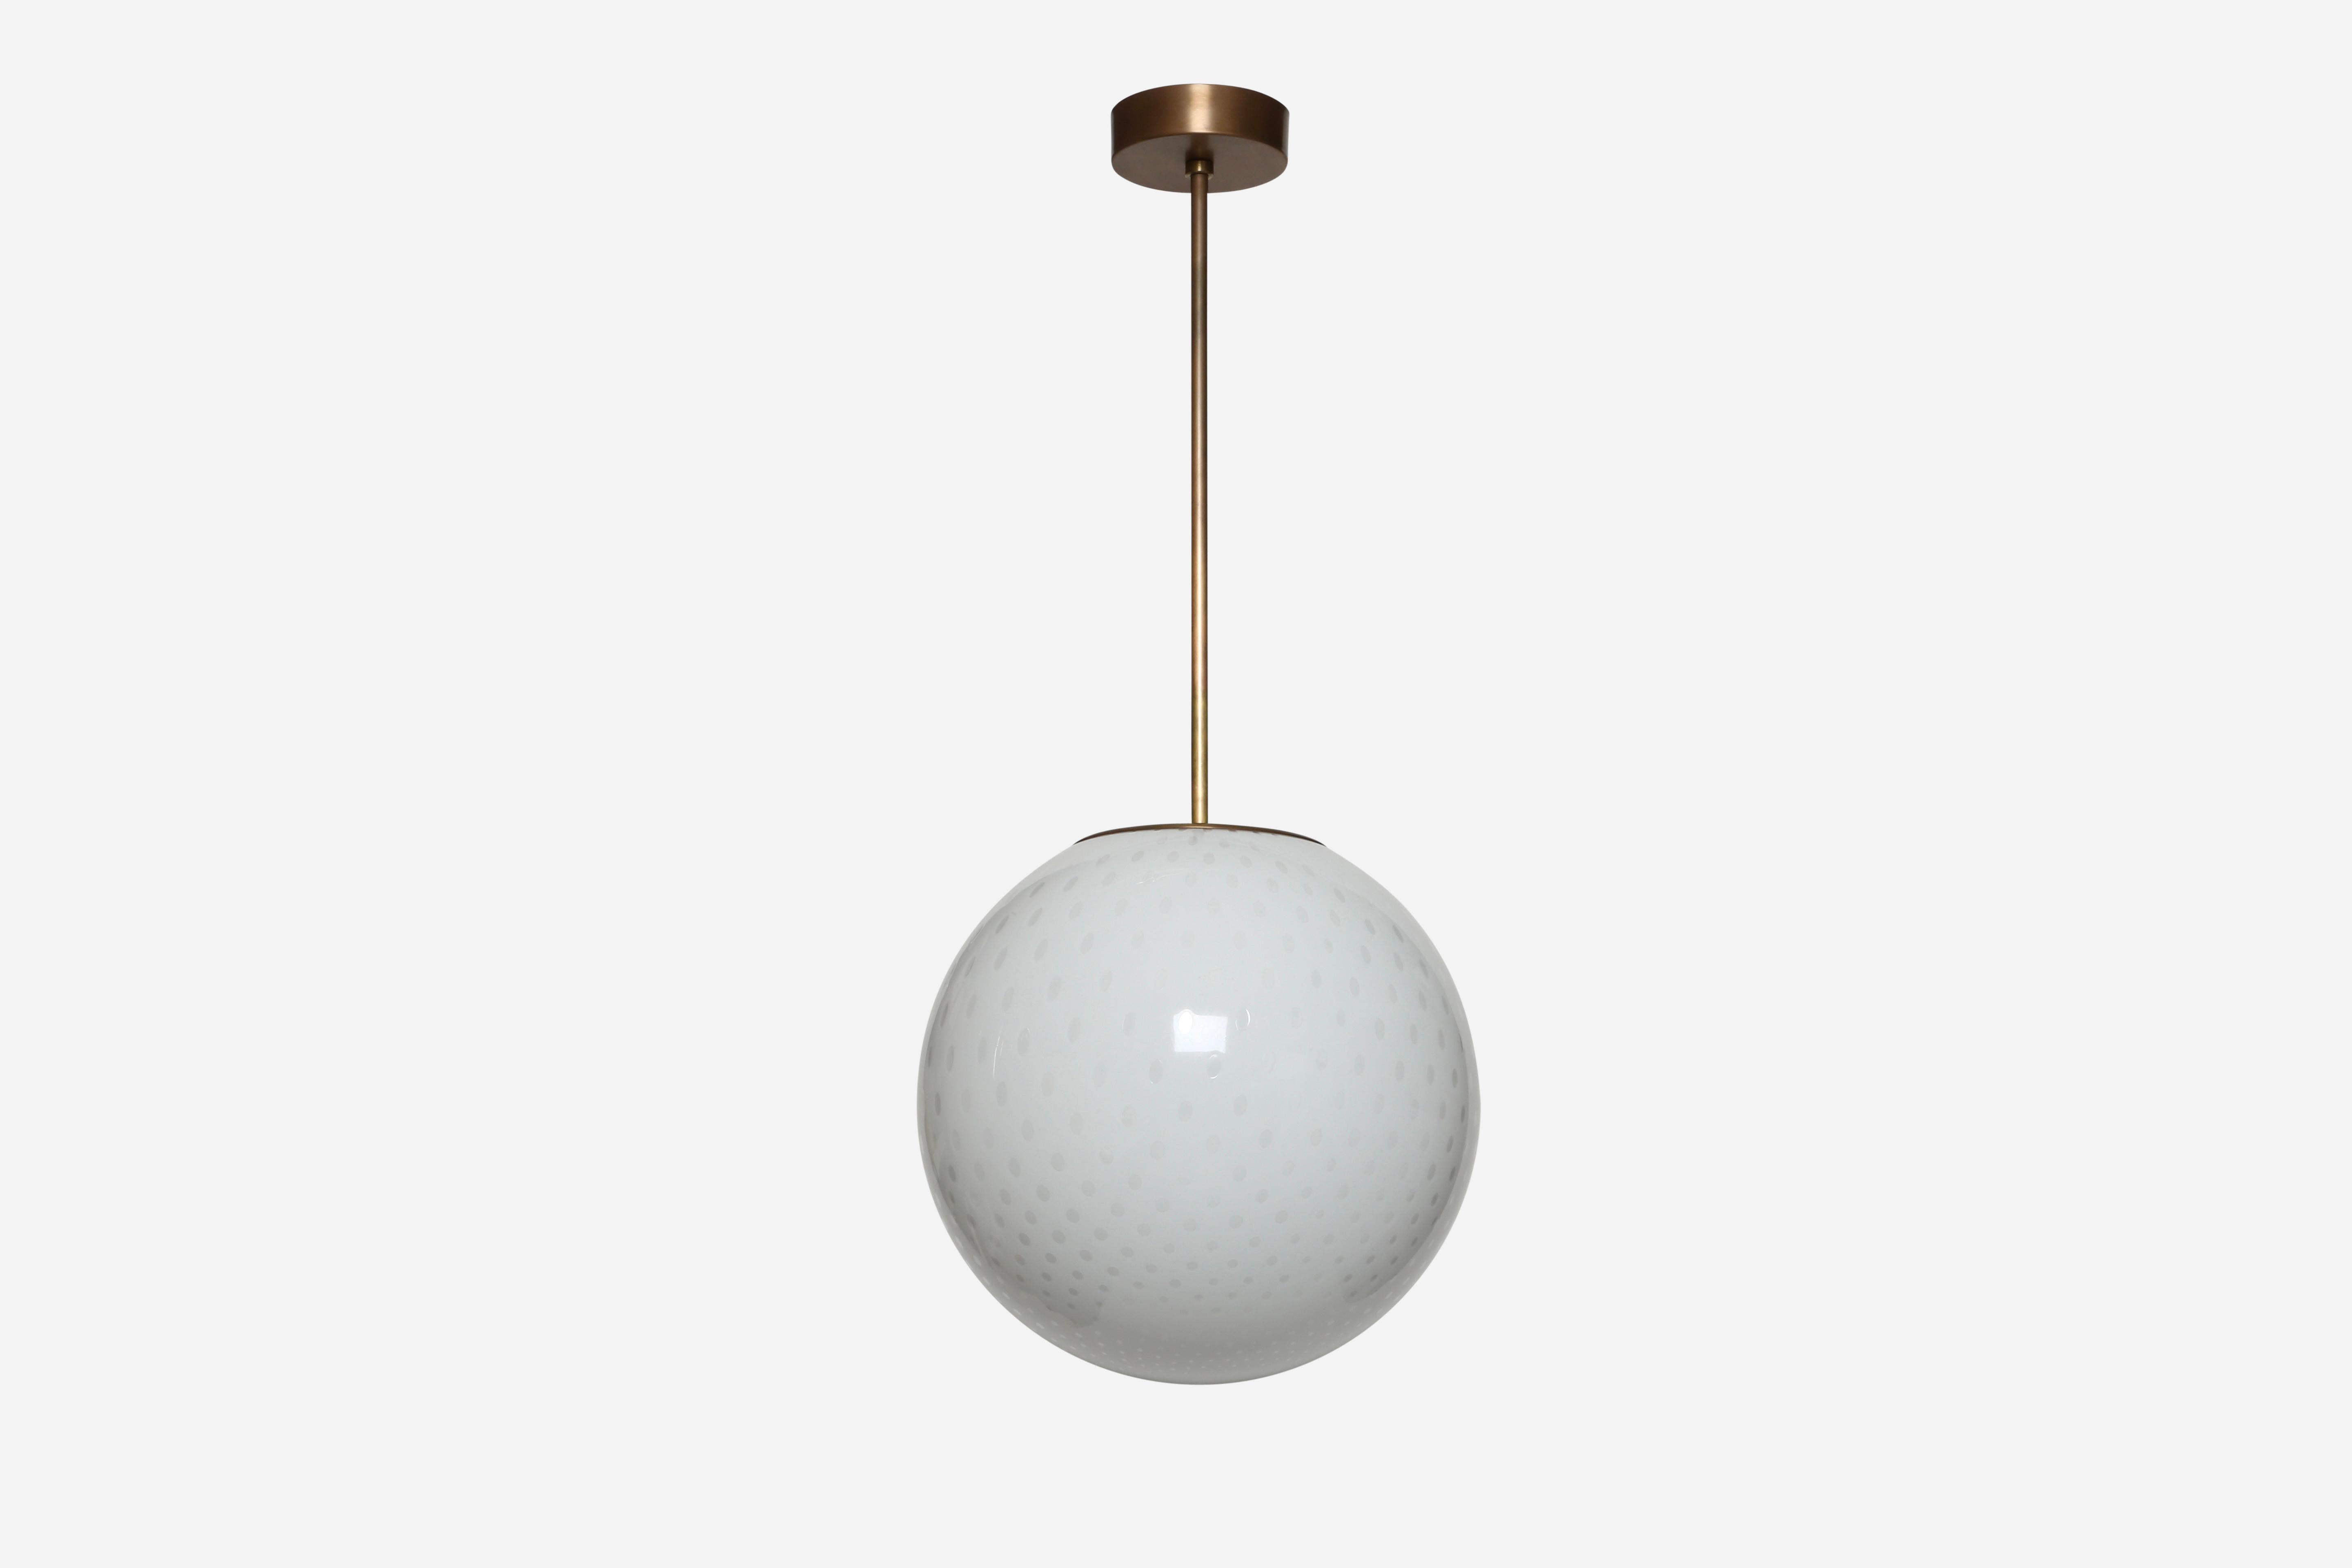 Murano glass ceiling pendants.
Made for us exclusively in Italy.
Hand blown glass, patinated brass.
Italy 2021.
Rewired for US.
Overall drop is adjustable. Ceiling rod can be shorter.
Price is for one pendant.
Four pendants in stock.

At Illustris